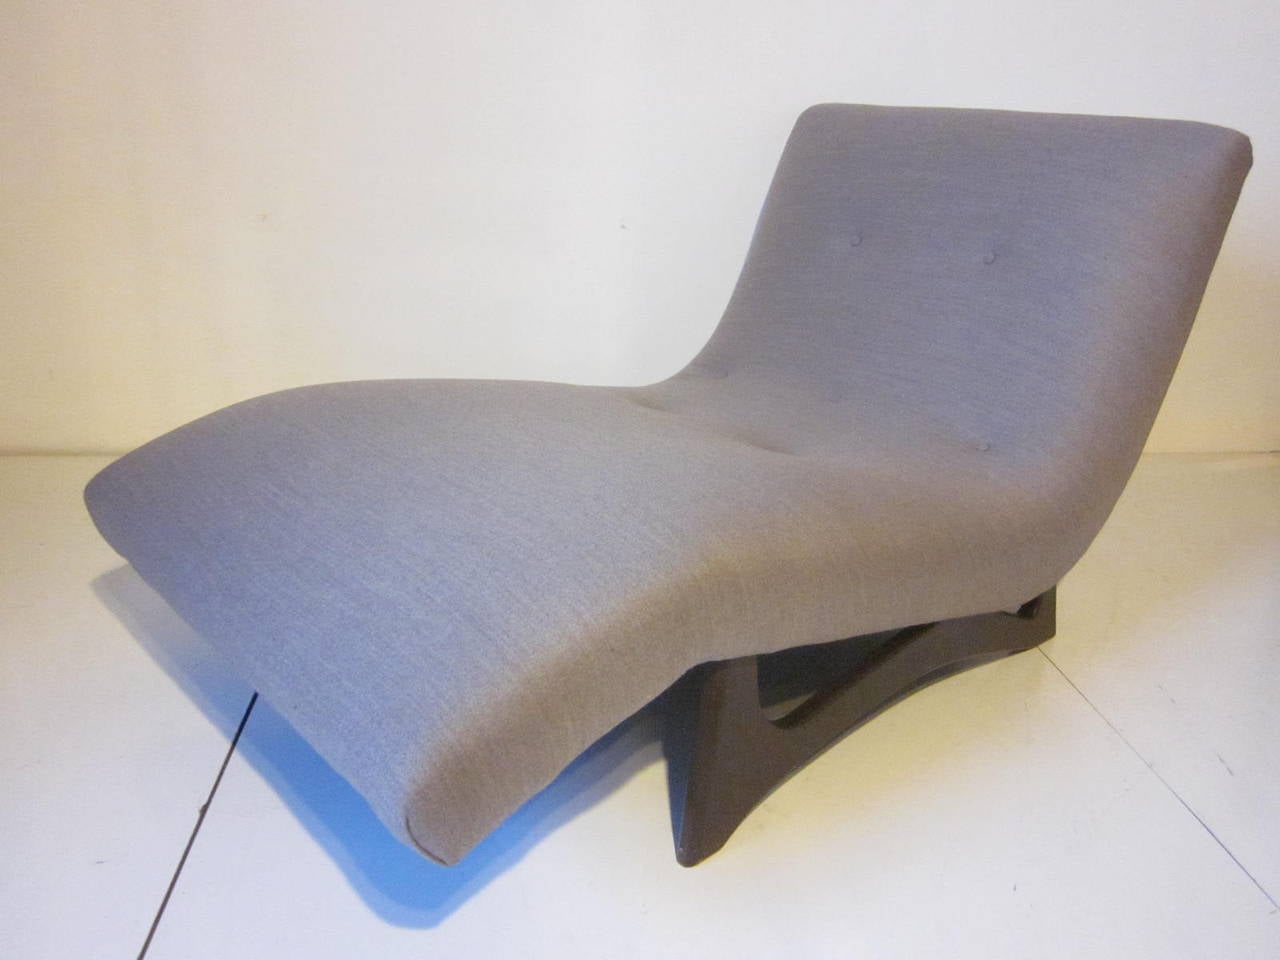 An upholstered wave lounge chair sitting on dark walnut legs manufactured by Craft Associates.